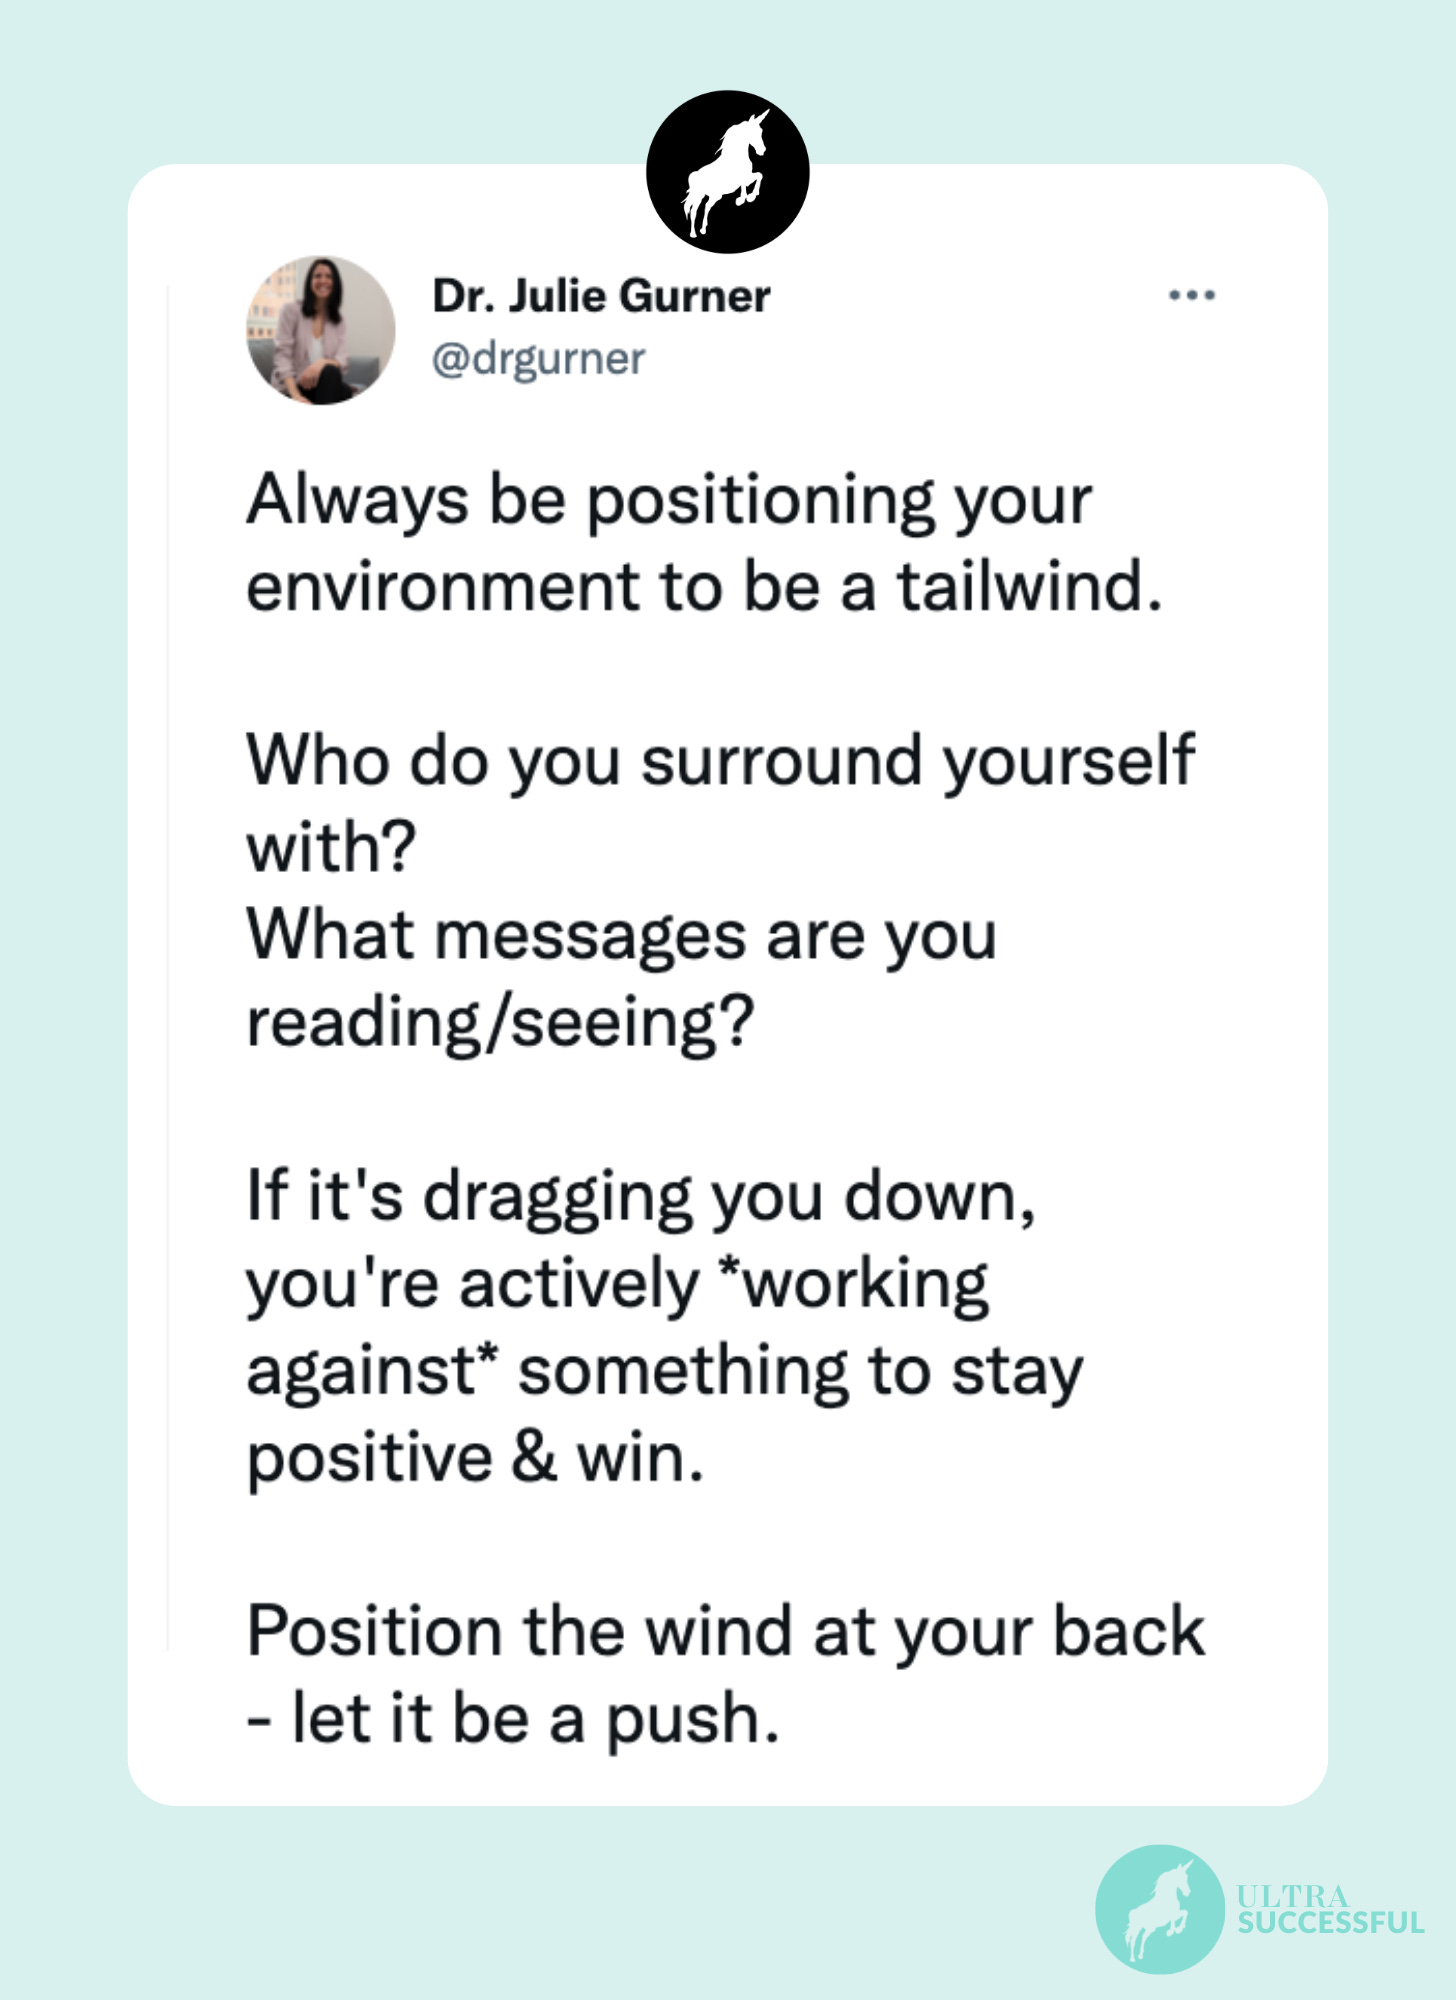 @drgurner: Always be positioning your environment to be a tailwind.  Who do you surround yourself with?  What messages are you reading/seeing?  If it's dragging you down, you're actively *working against* something to stay positive & win.   Position the wind at your back - let it be a push.